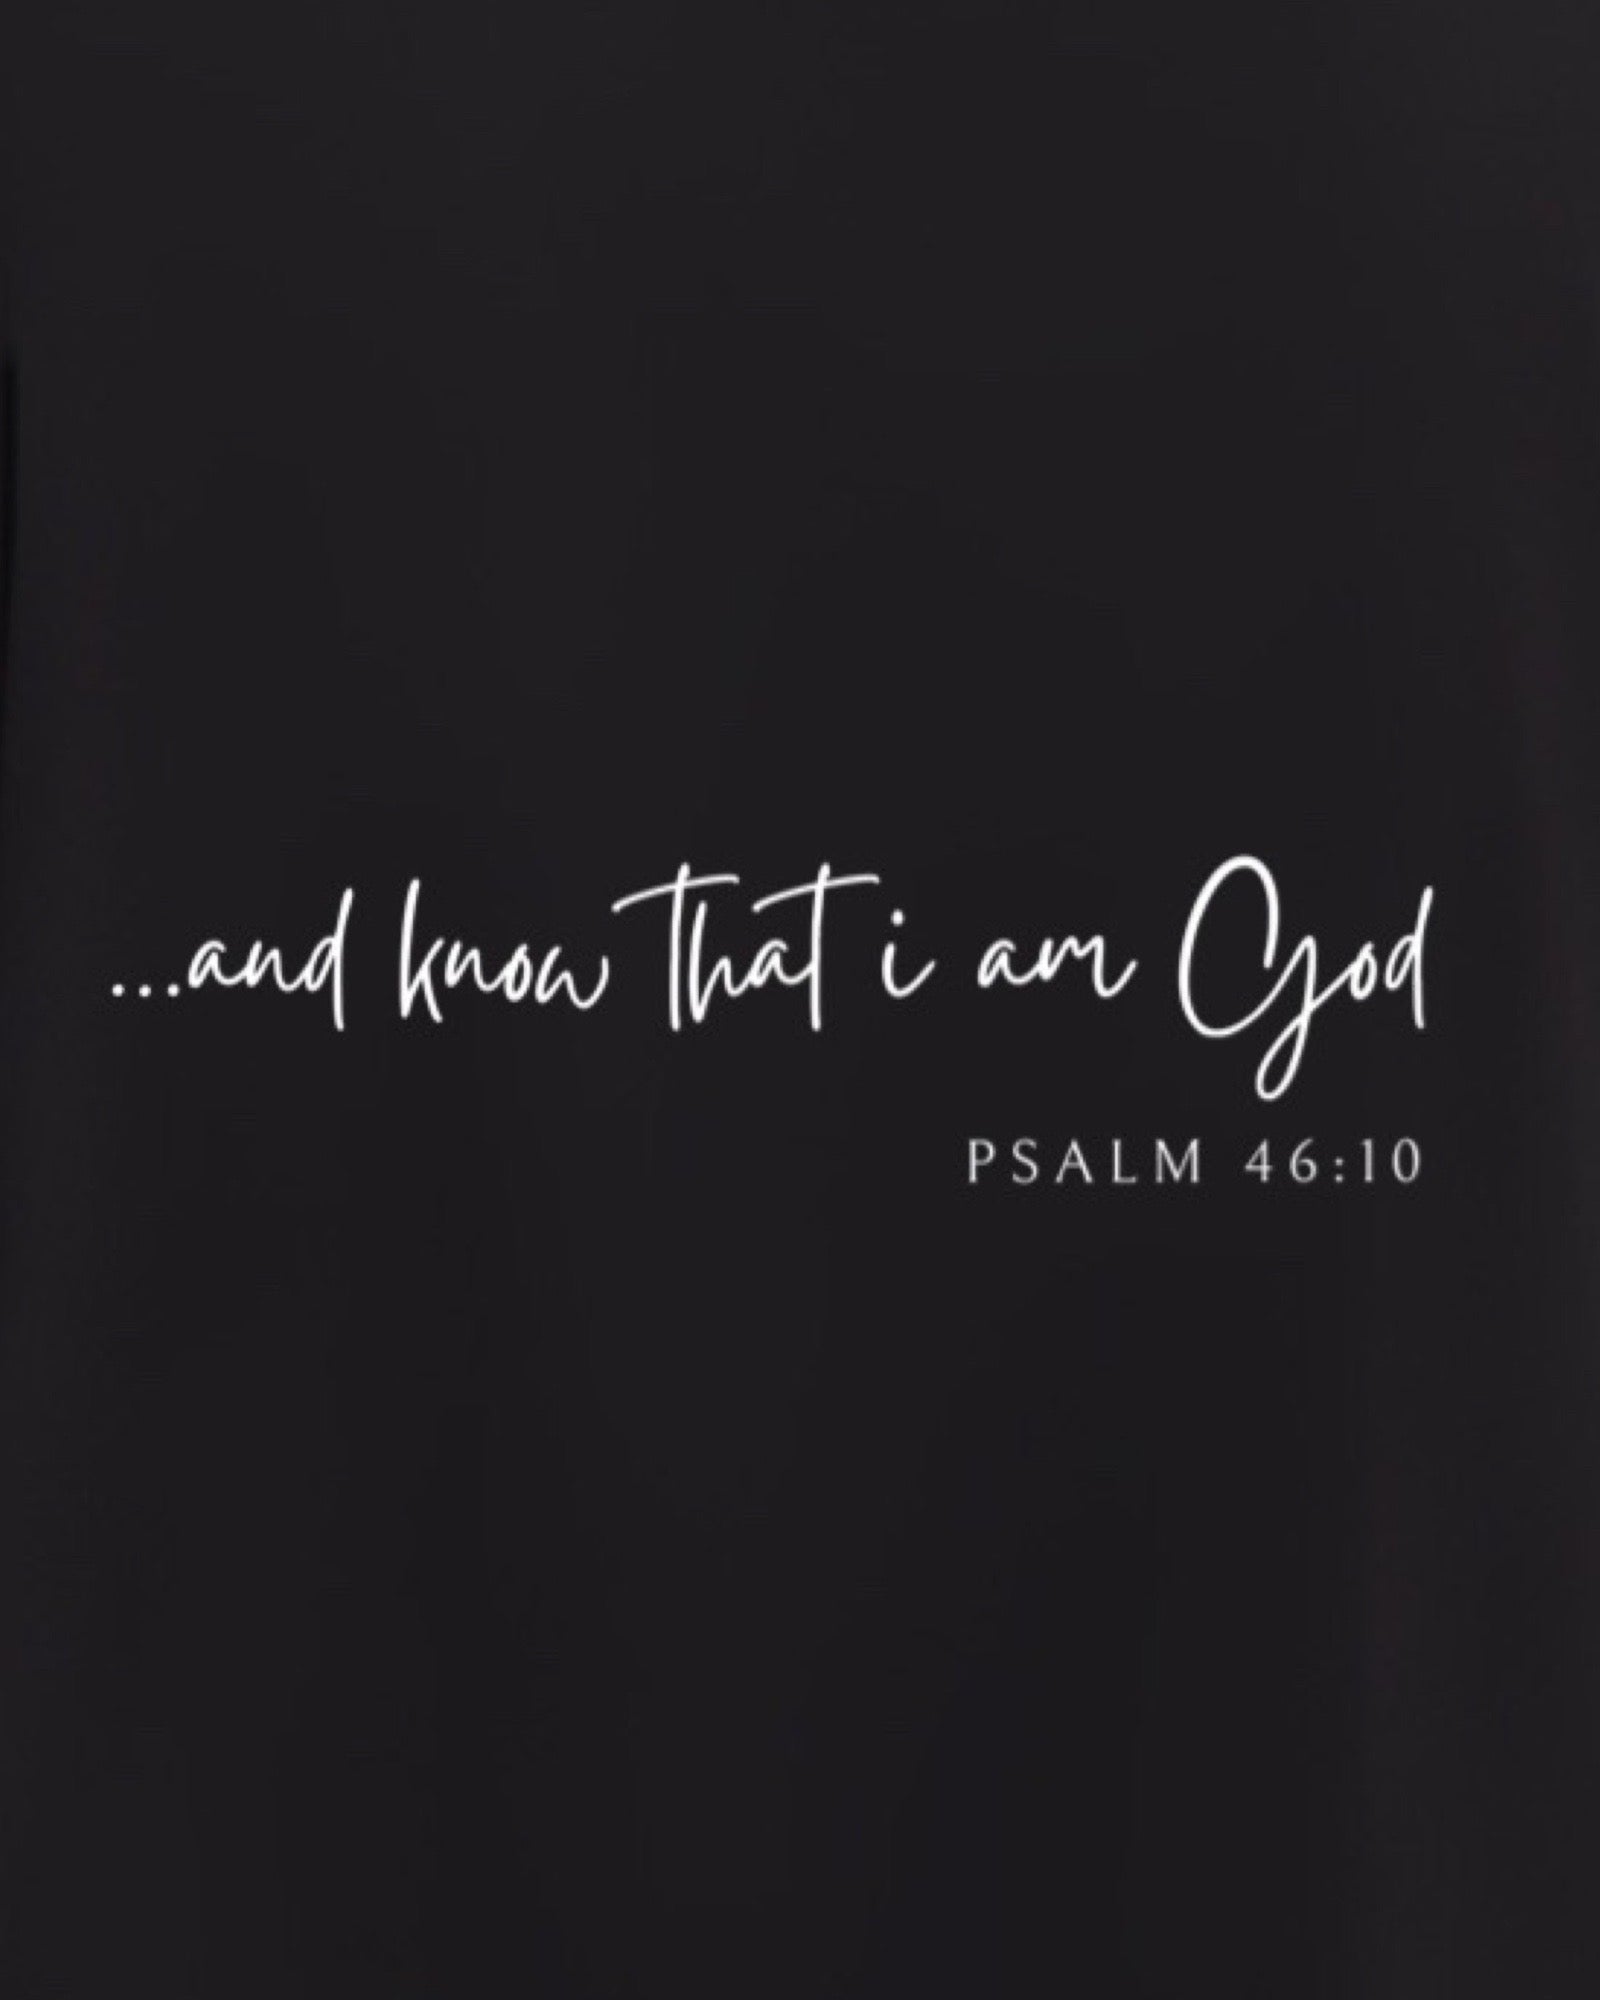 Be Still and Know that I am God - Christian T-shirt (Close up)